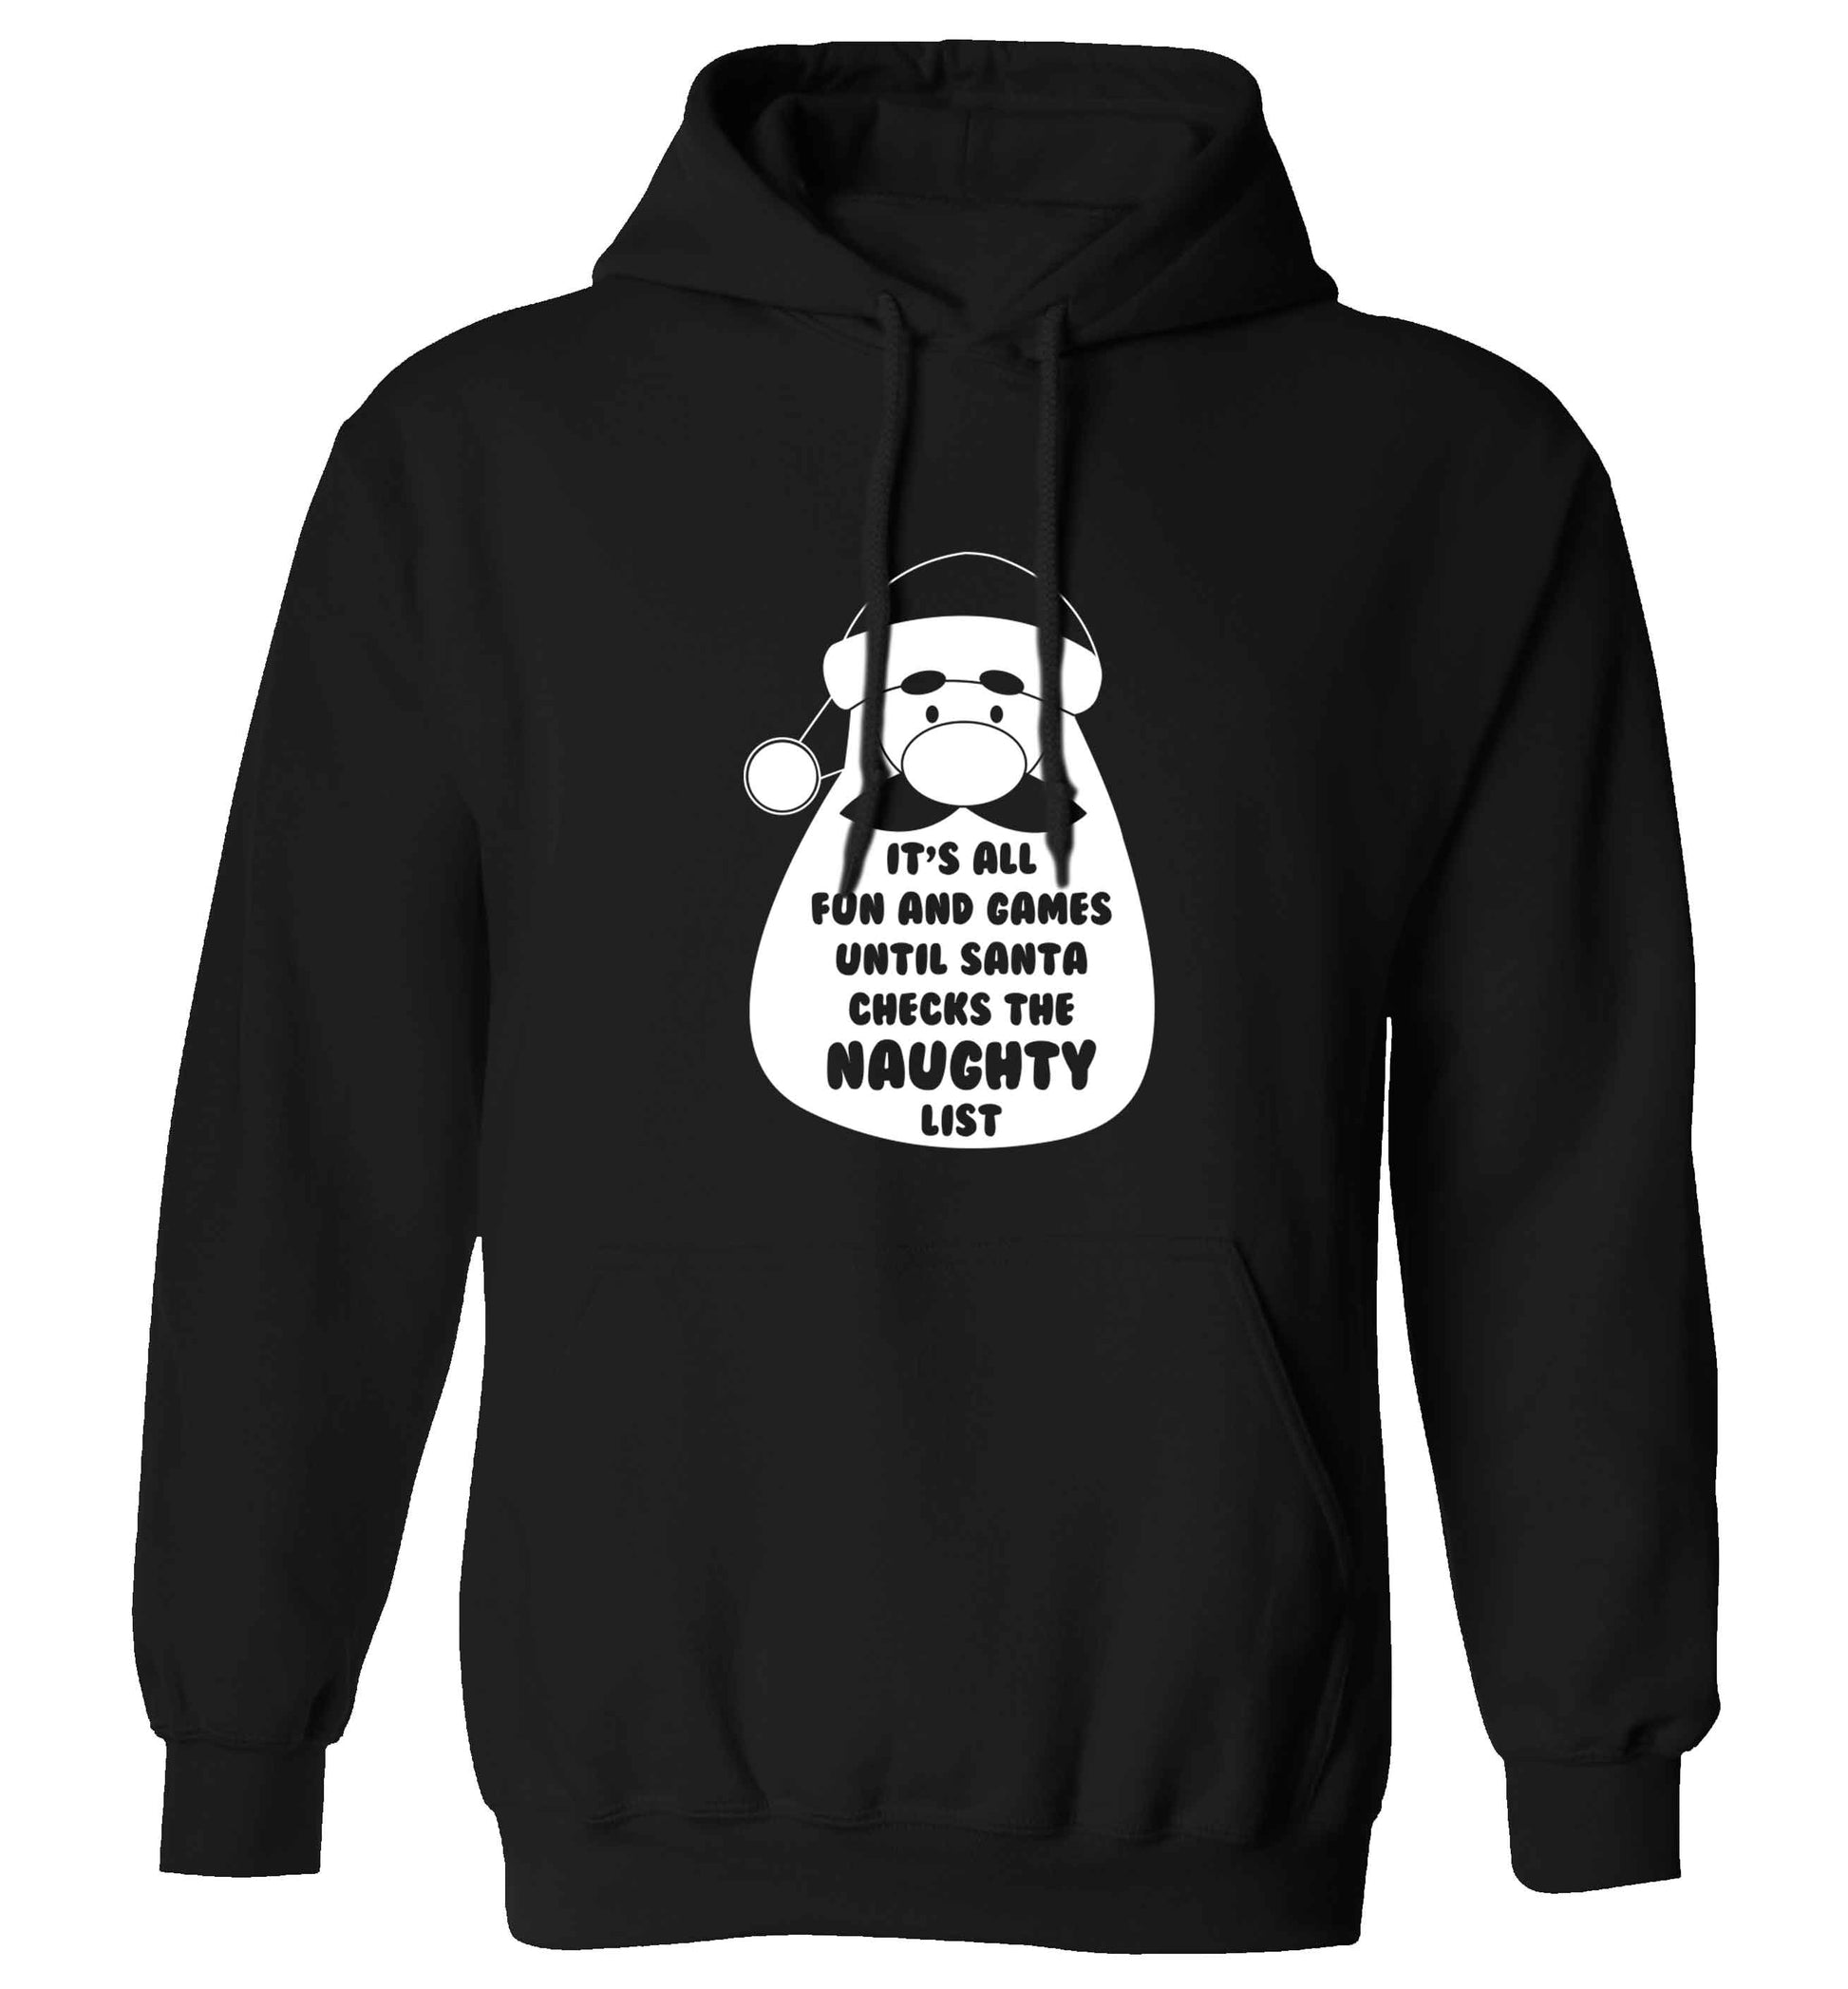 It's all fun and games until Santa checks the naughty list adults unisex black hoodie 2XL